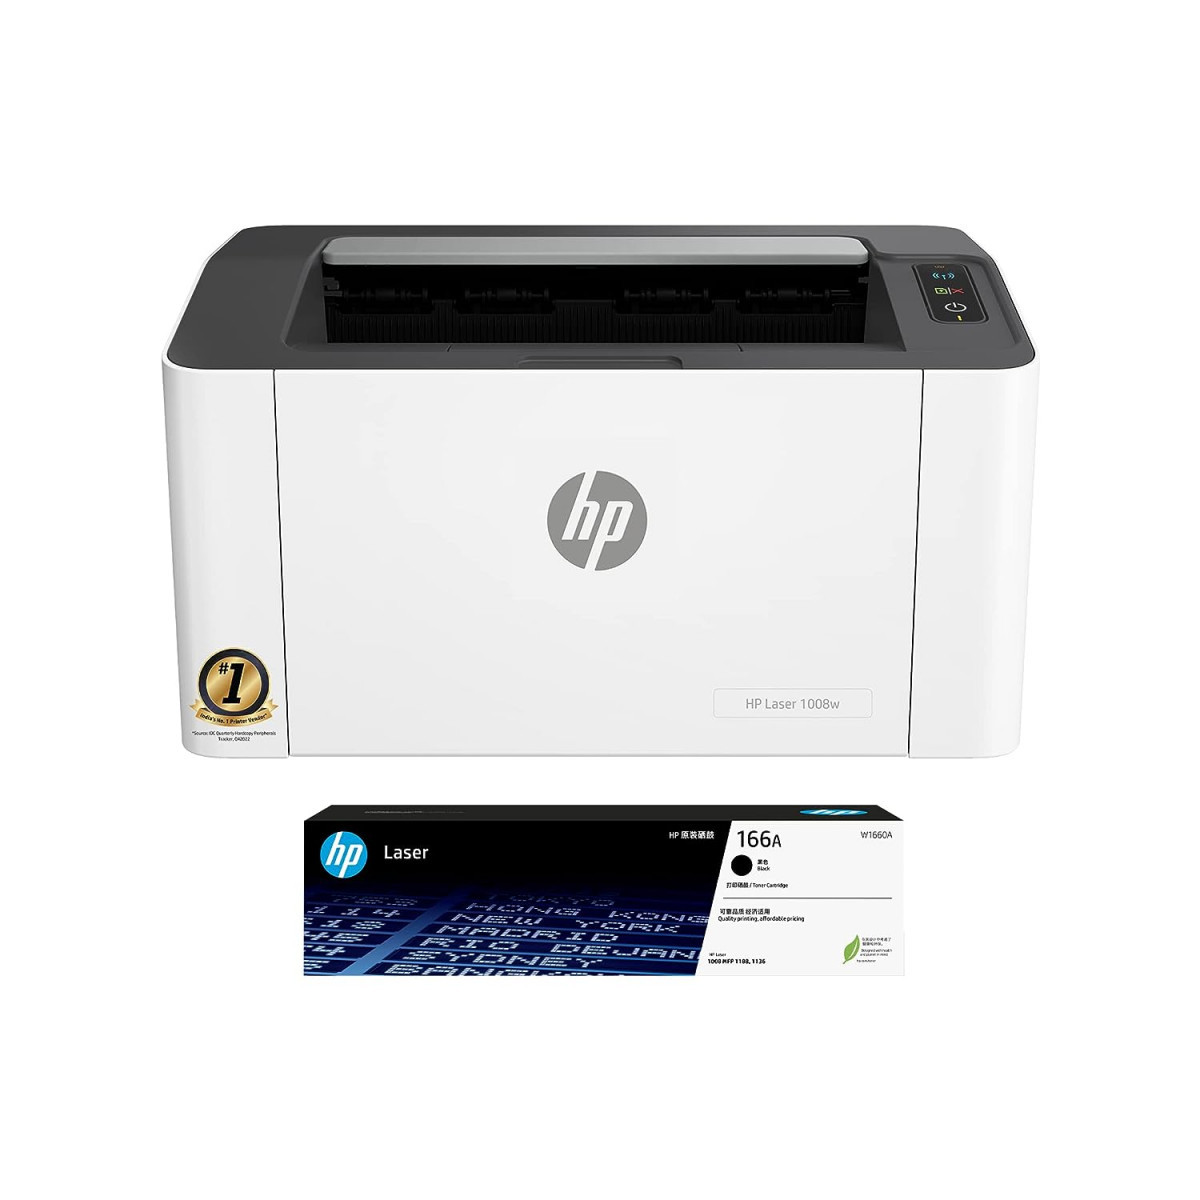 HP Laser 1008w Printer Wireless Single Function Print Hi-Speed USB 20 Up to 21 ppm 150-sheet Input Tray 100-sheet Output Tray 10000-page Duty Cycle 1-Year Warranty Black and White 714Z9A